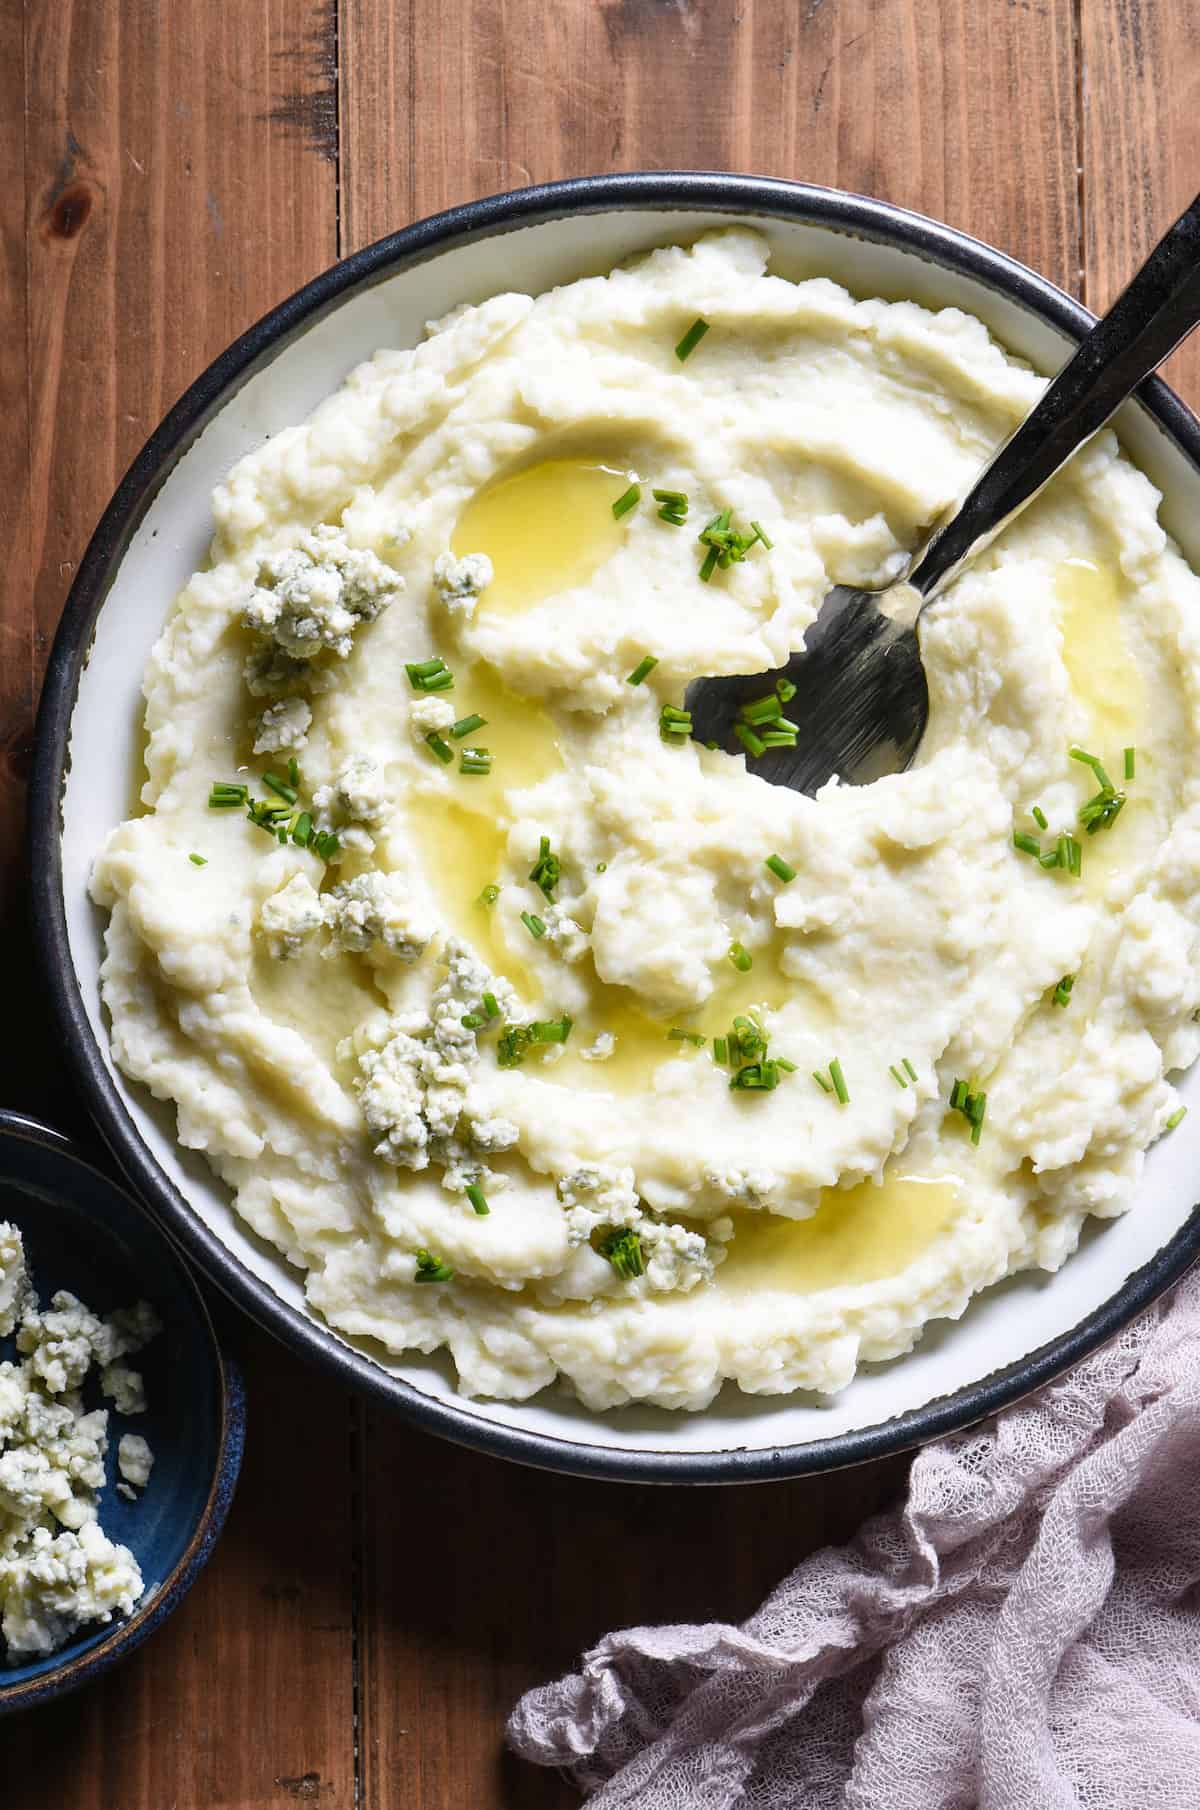 A shallow bowl filled with blue cheese mashed potatoes garnished with melted butter and chives.